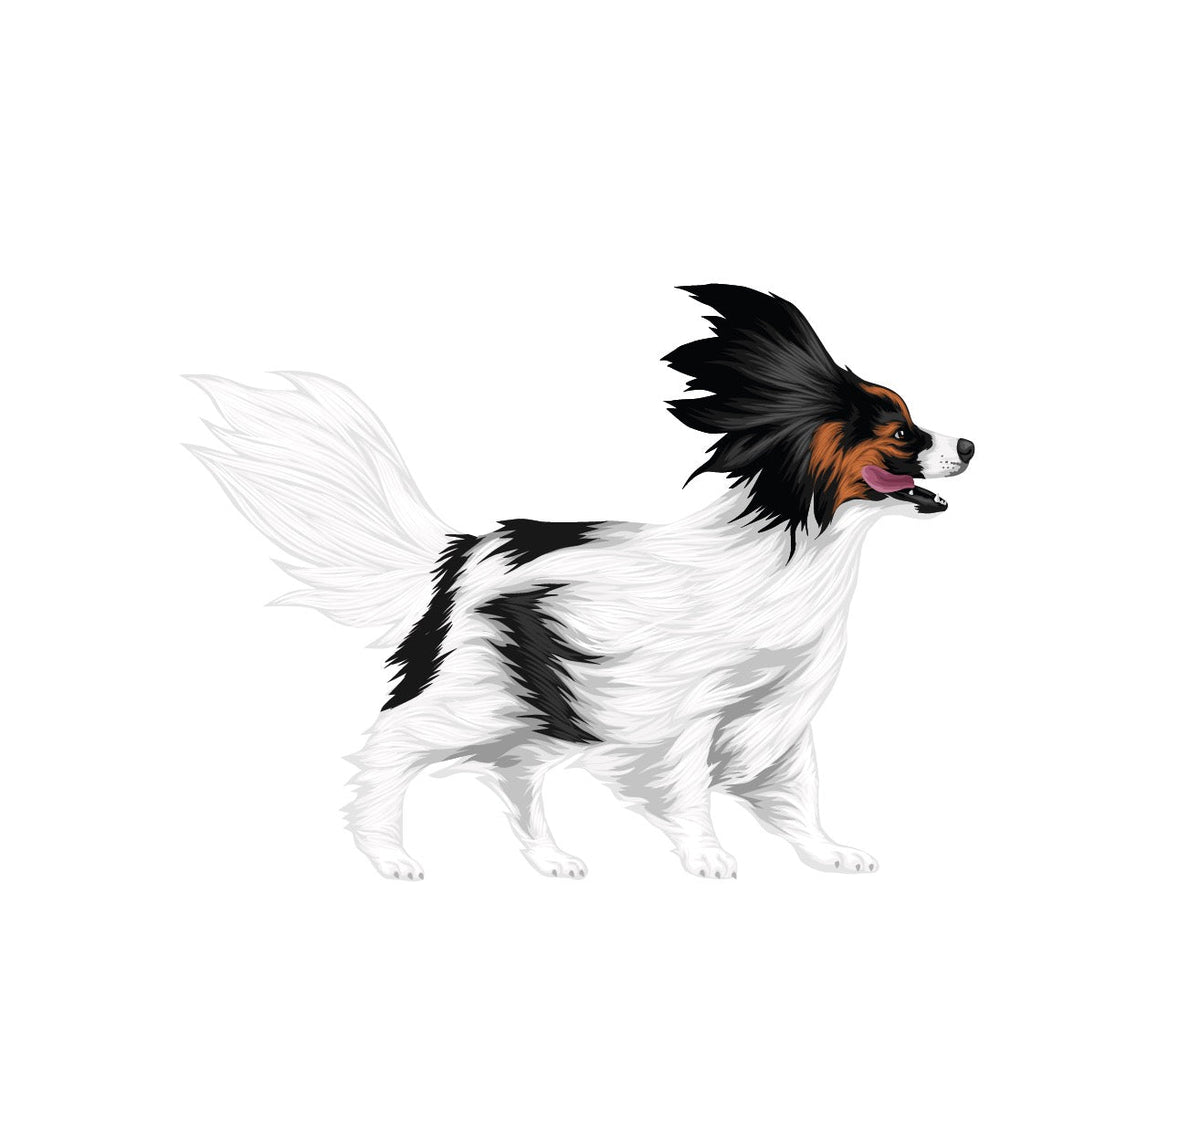 Life-Sized Papillon Decals - CoverAlls Decals